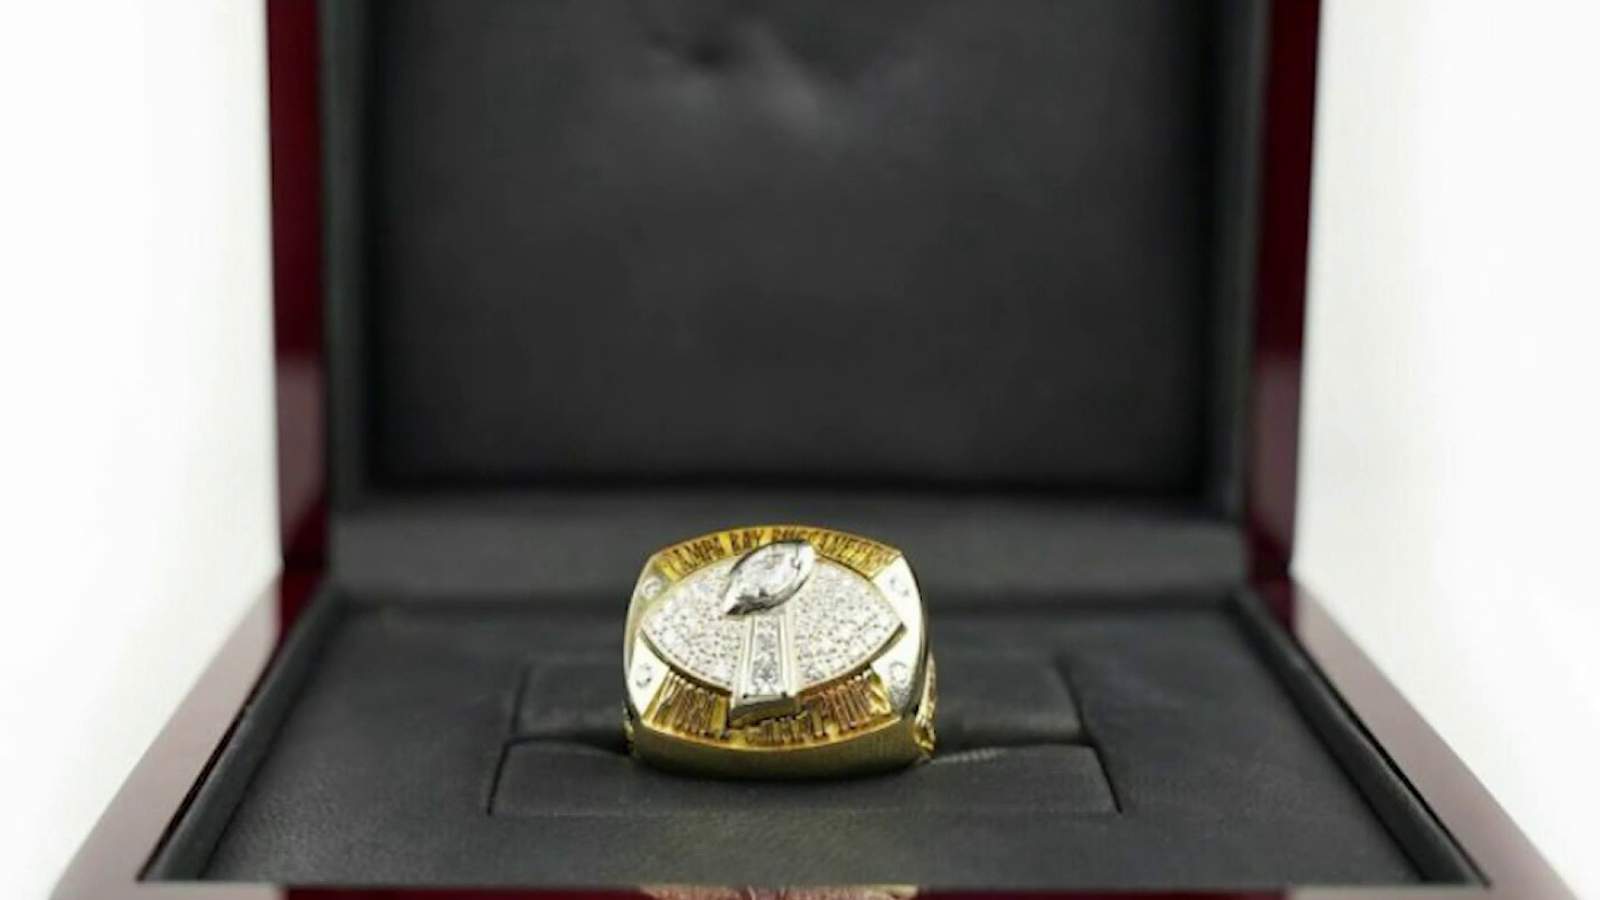 2003 Buccaneers Super Bowl ring up for auction to support Boys & Girls Clubs